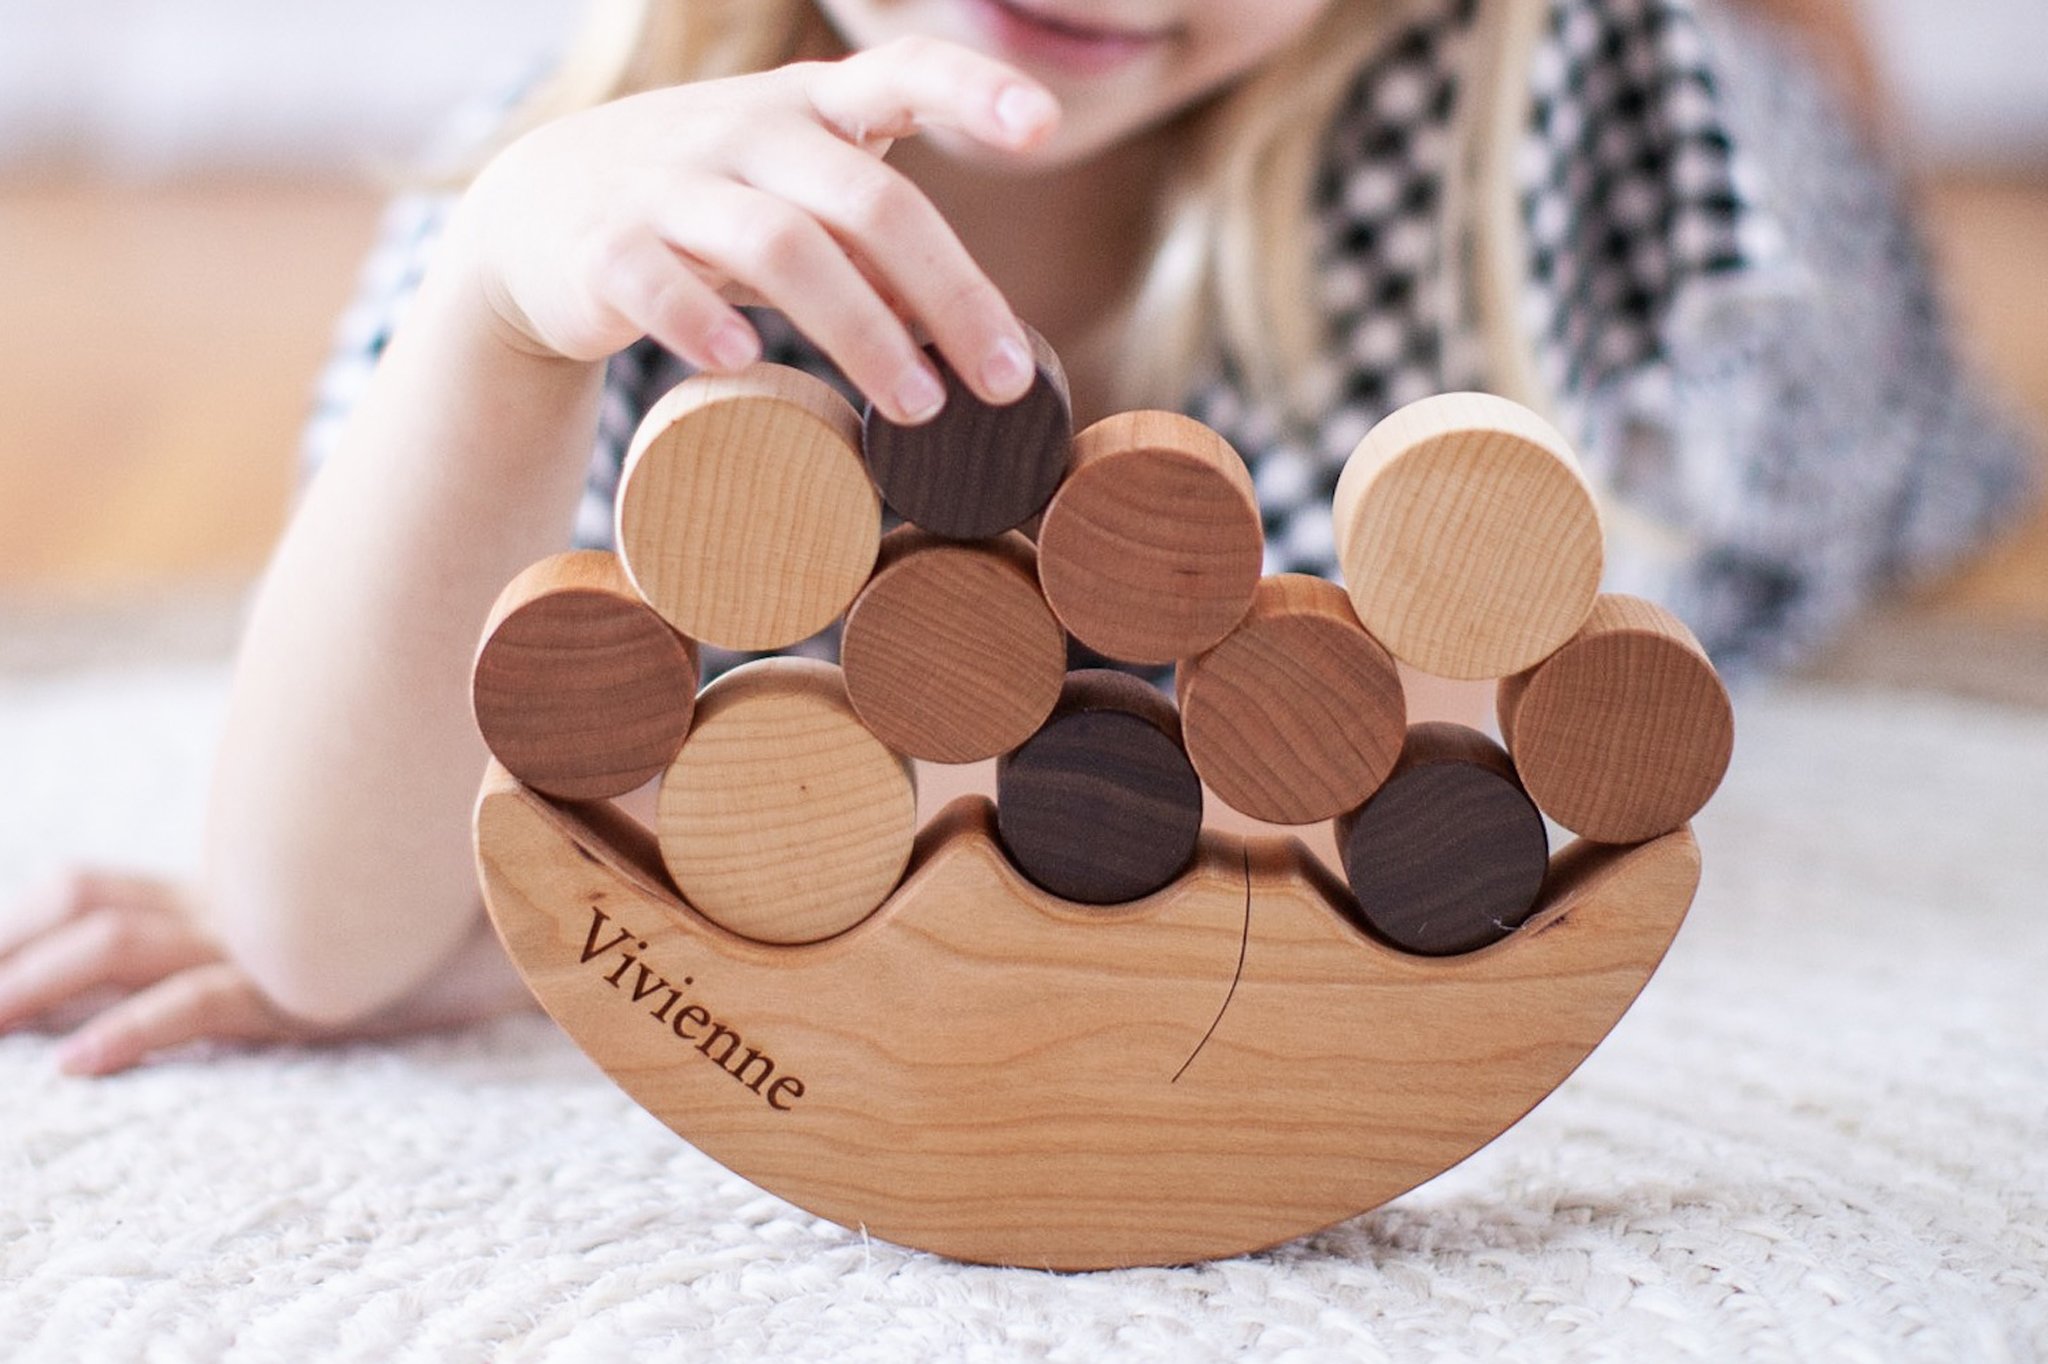 A wooden puzzle game.